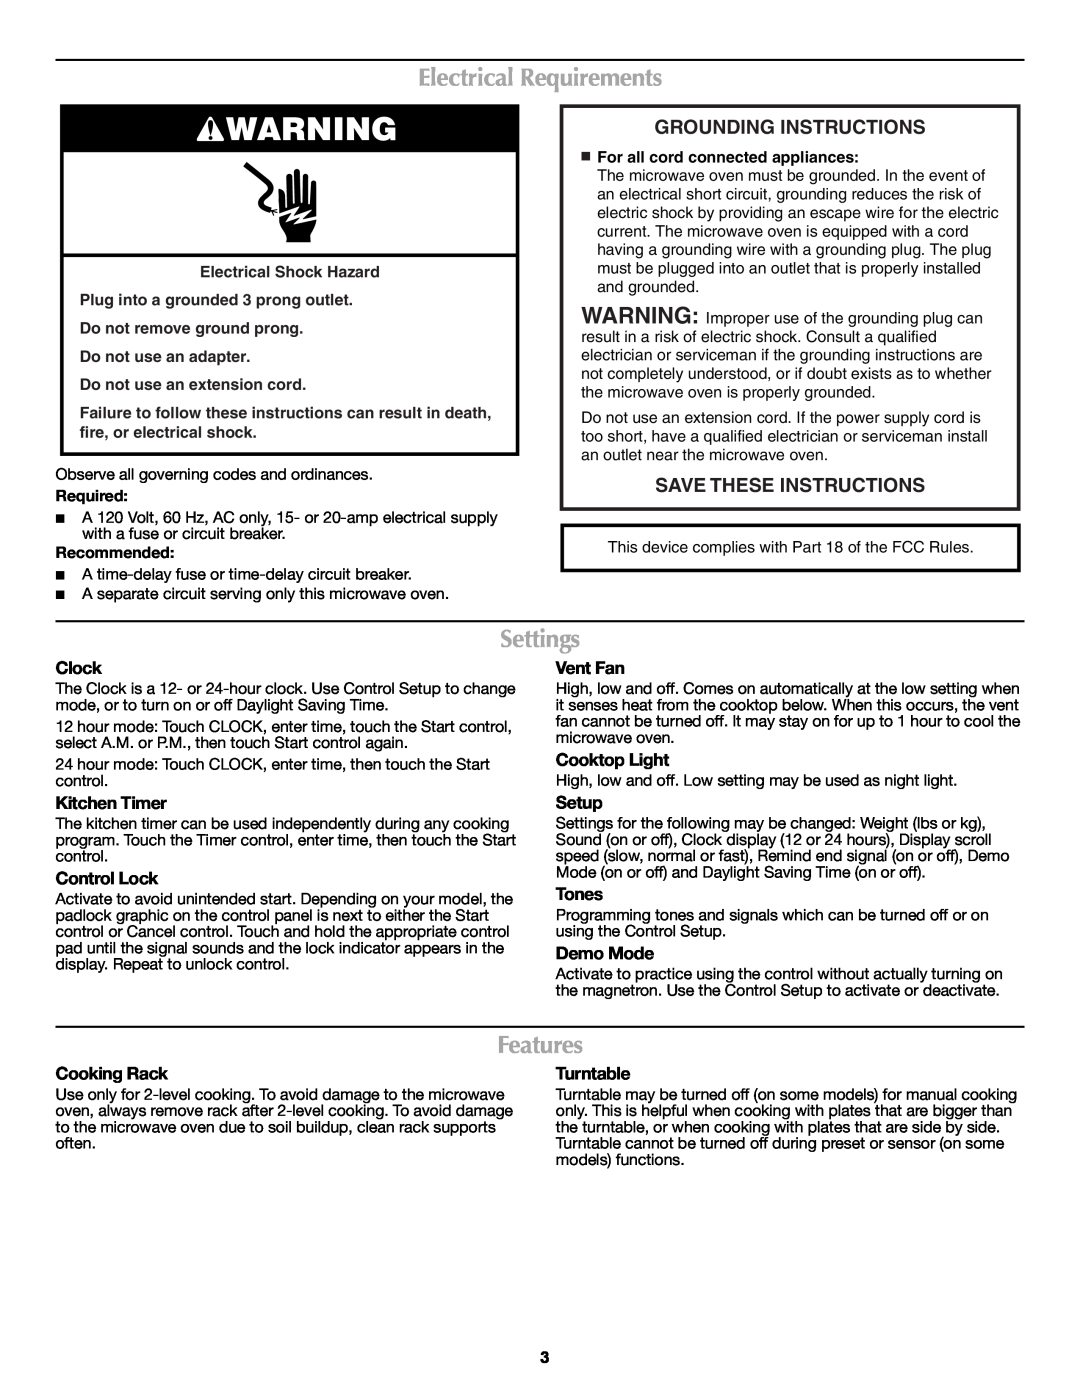 Maytag W10188231A, W10188941A Electrical Requirements, Settings, Features, Grounding Instructions, Save These Instructions 